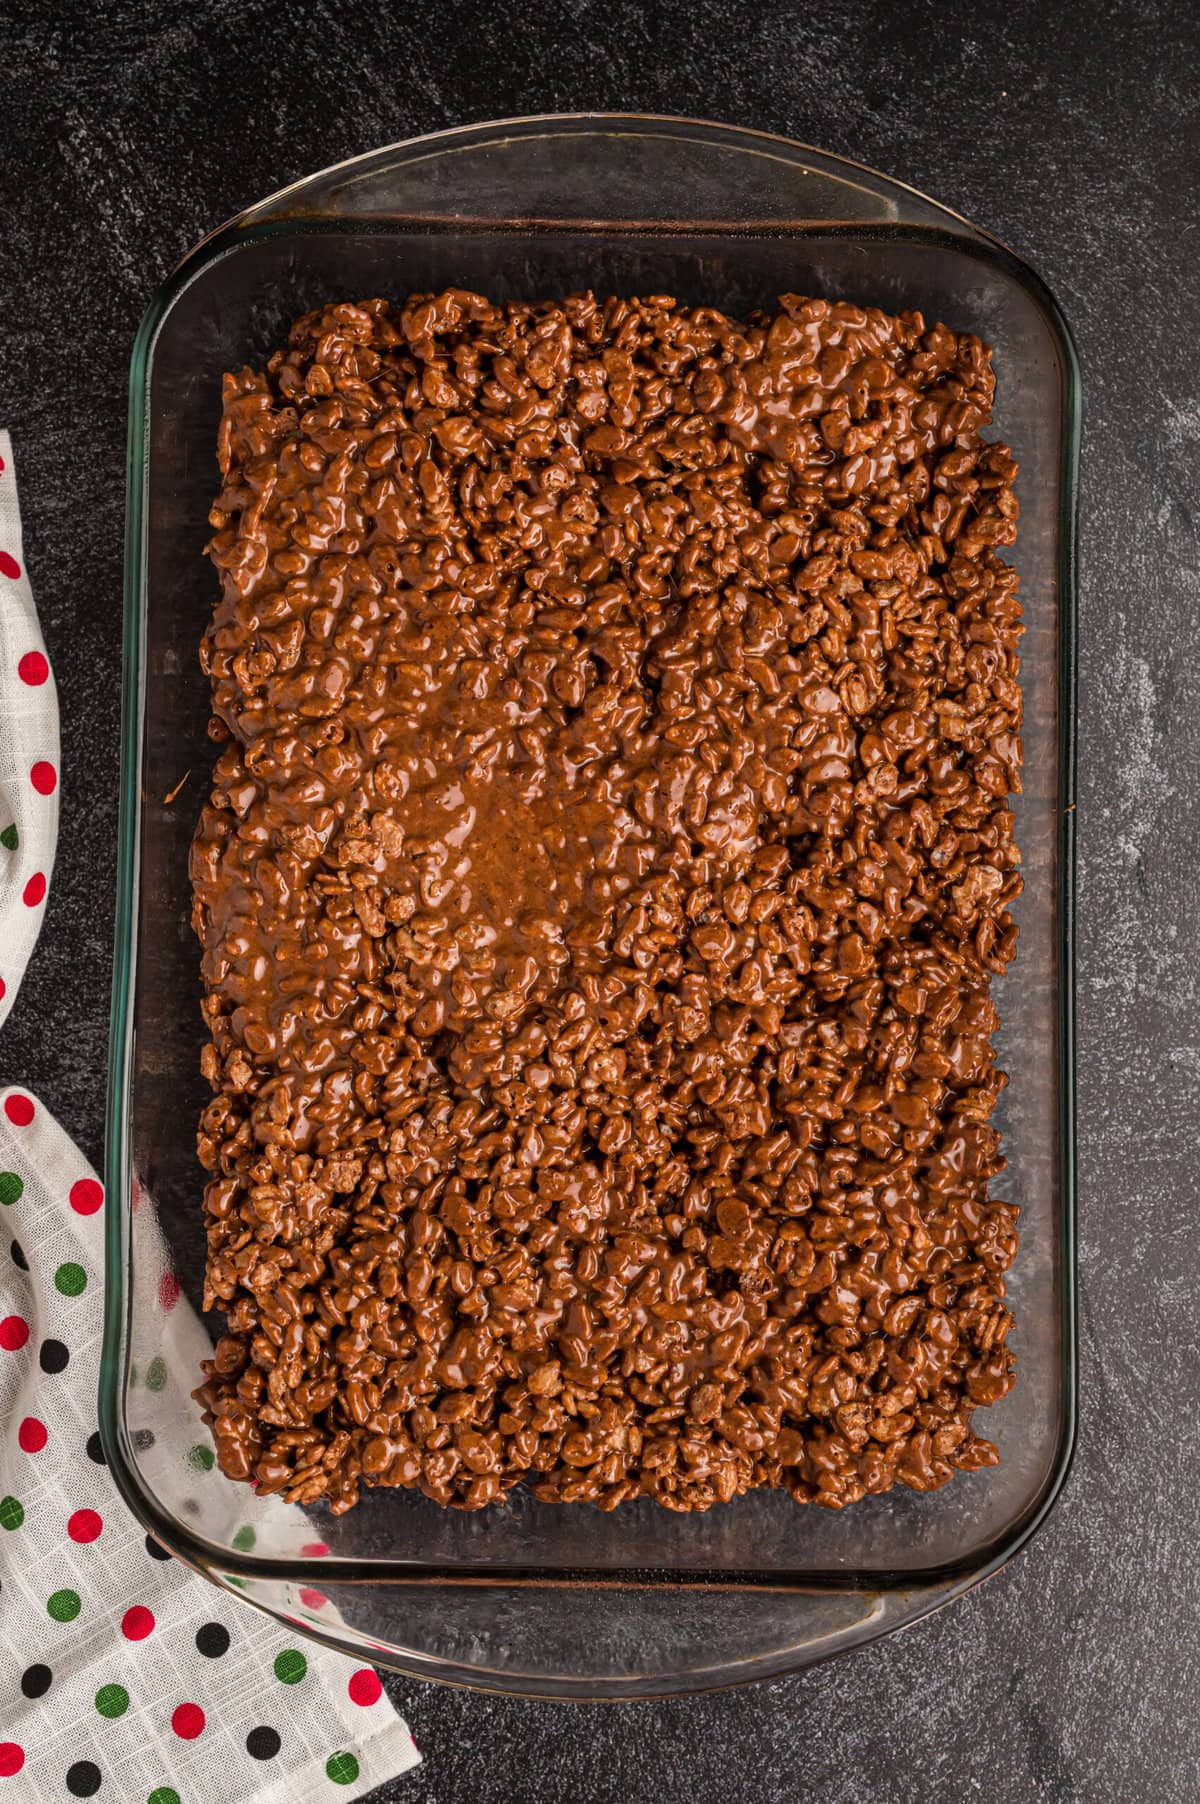 Adding the Chocolate Peppermint Rice Krispie Treats into the baking dish.